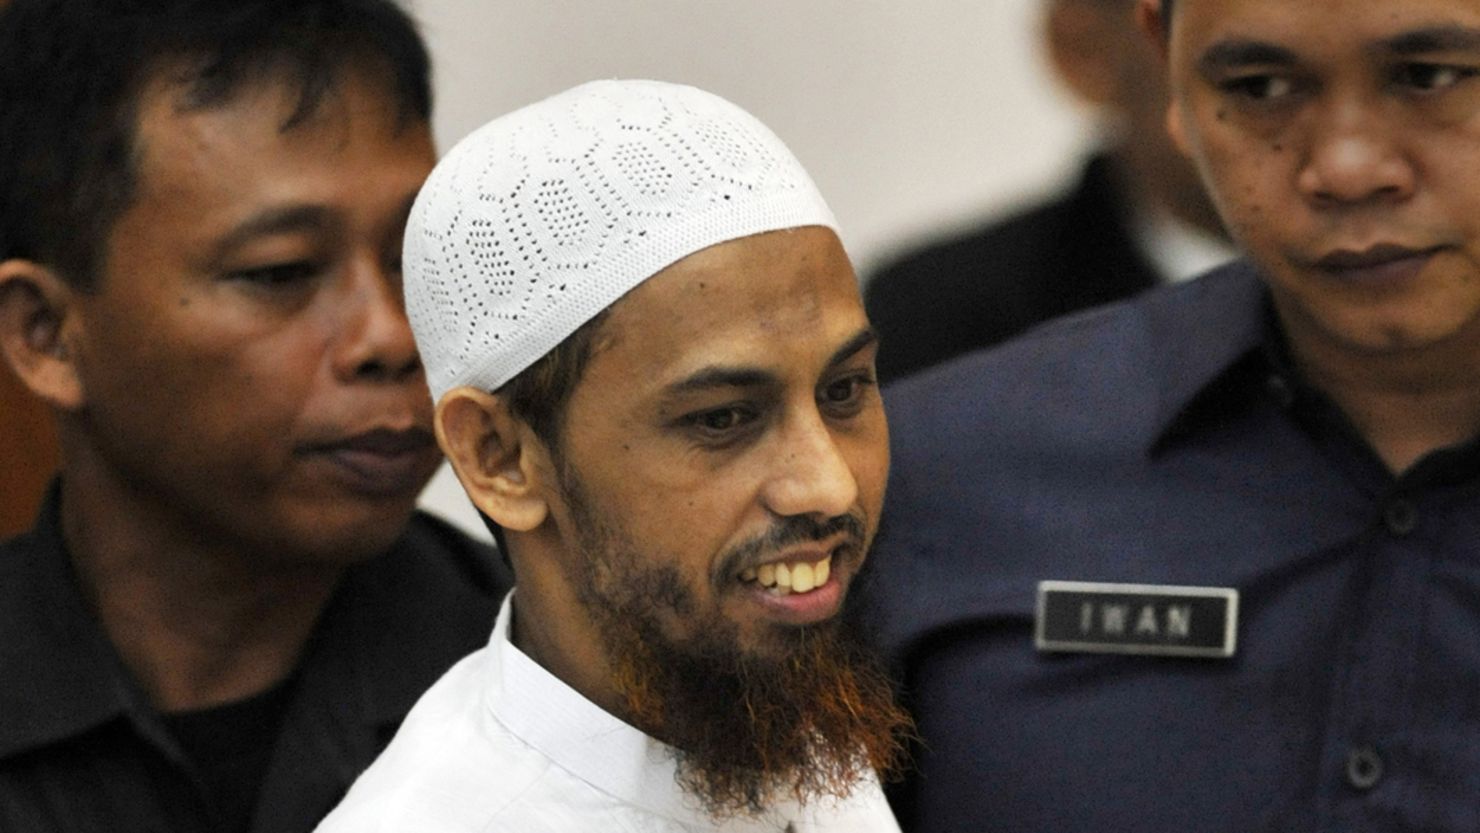 Umar Patek arrives at court in Jakarta to face trial for his alleged involvement in the 2002 Bali bombings.  